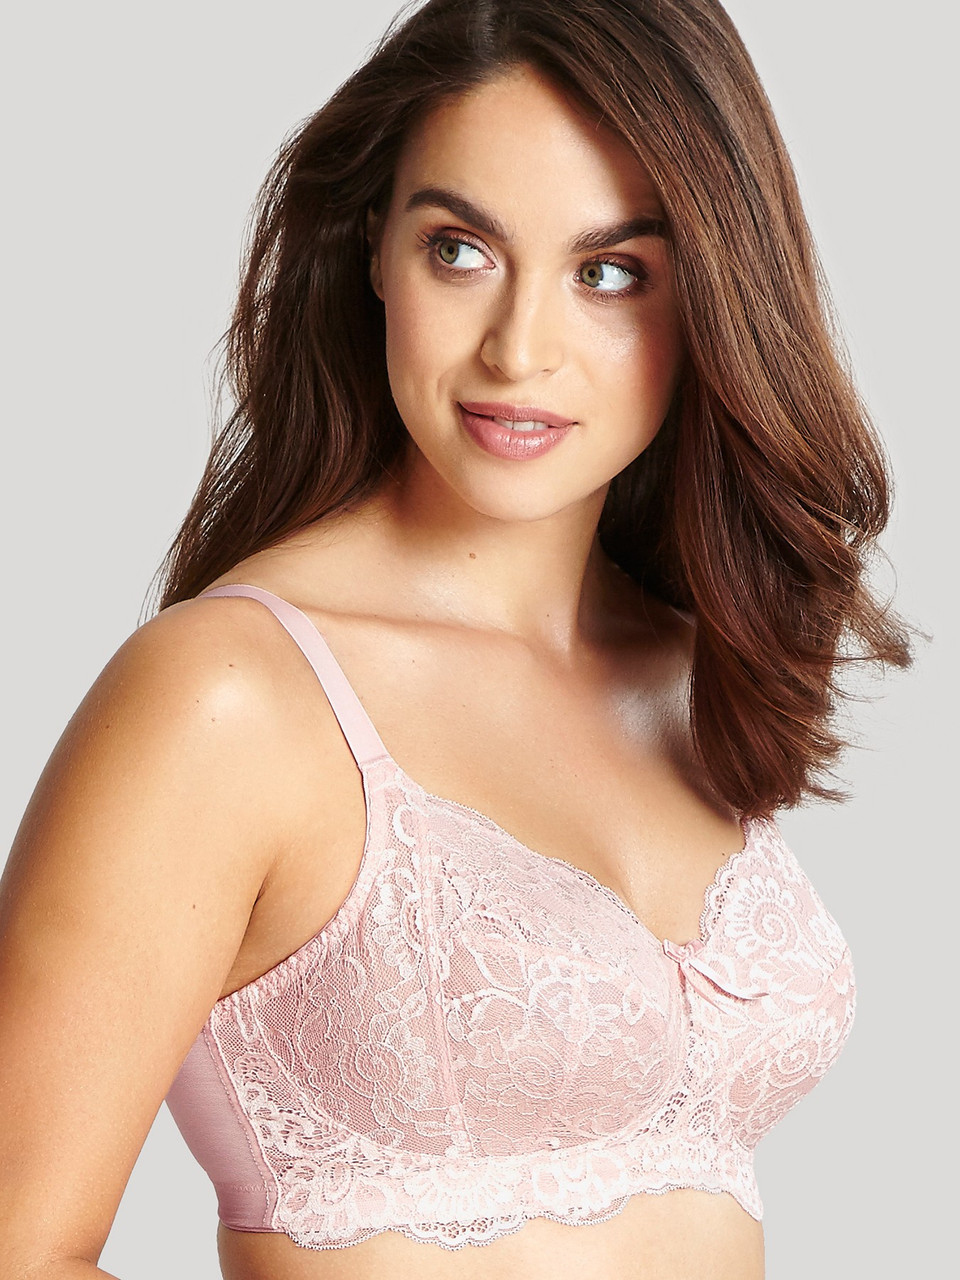 Andorra by Panache Lingerie - Big Girls Don't Cry Anymore